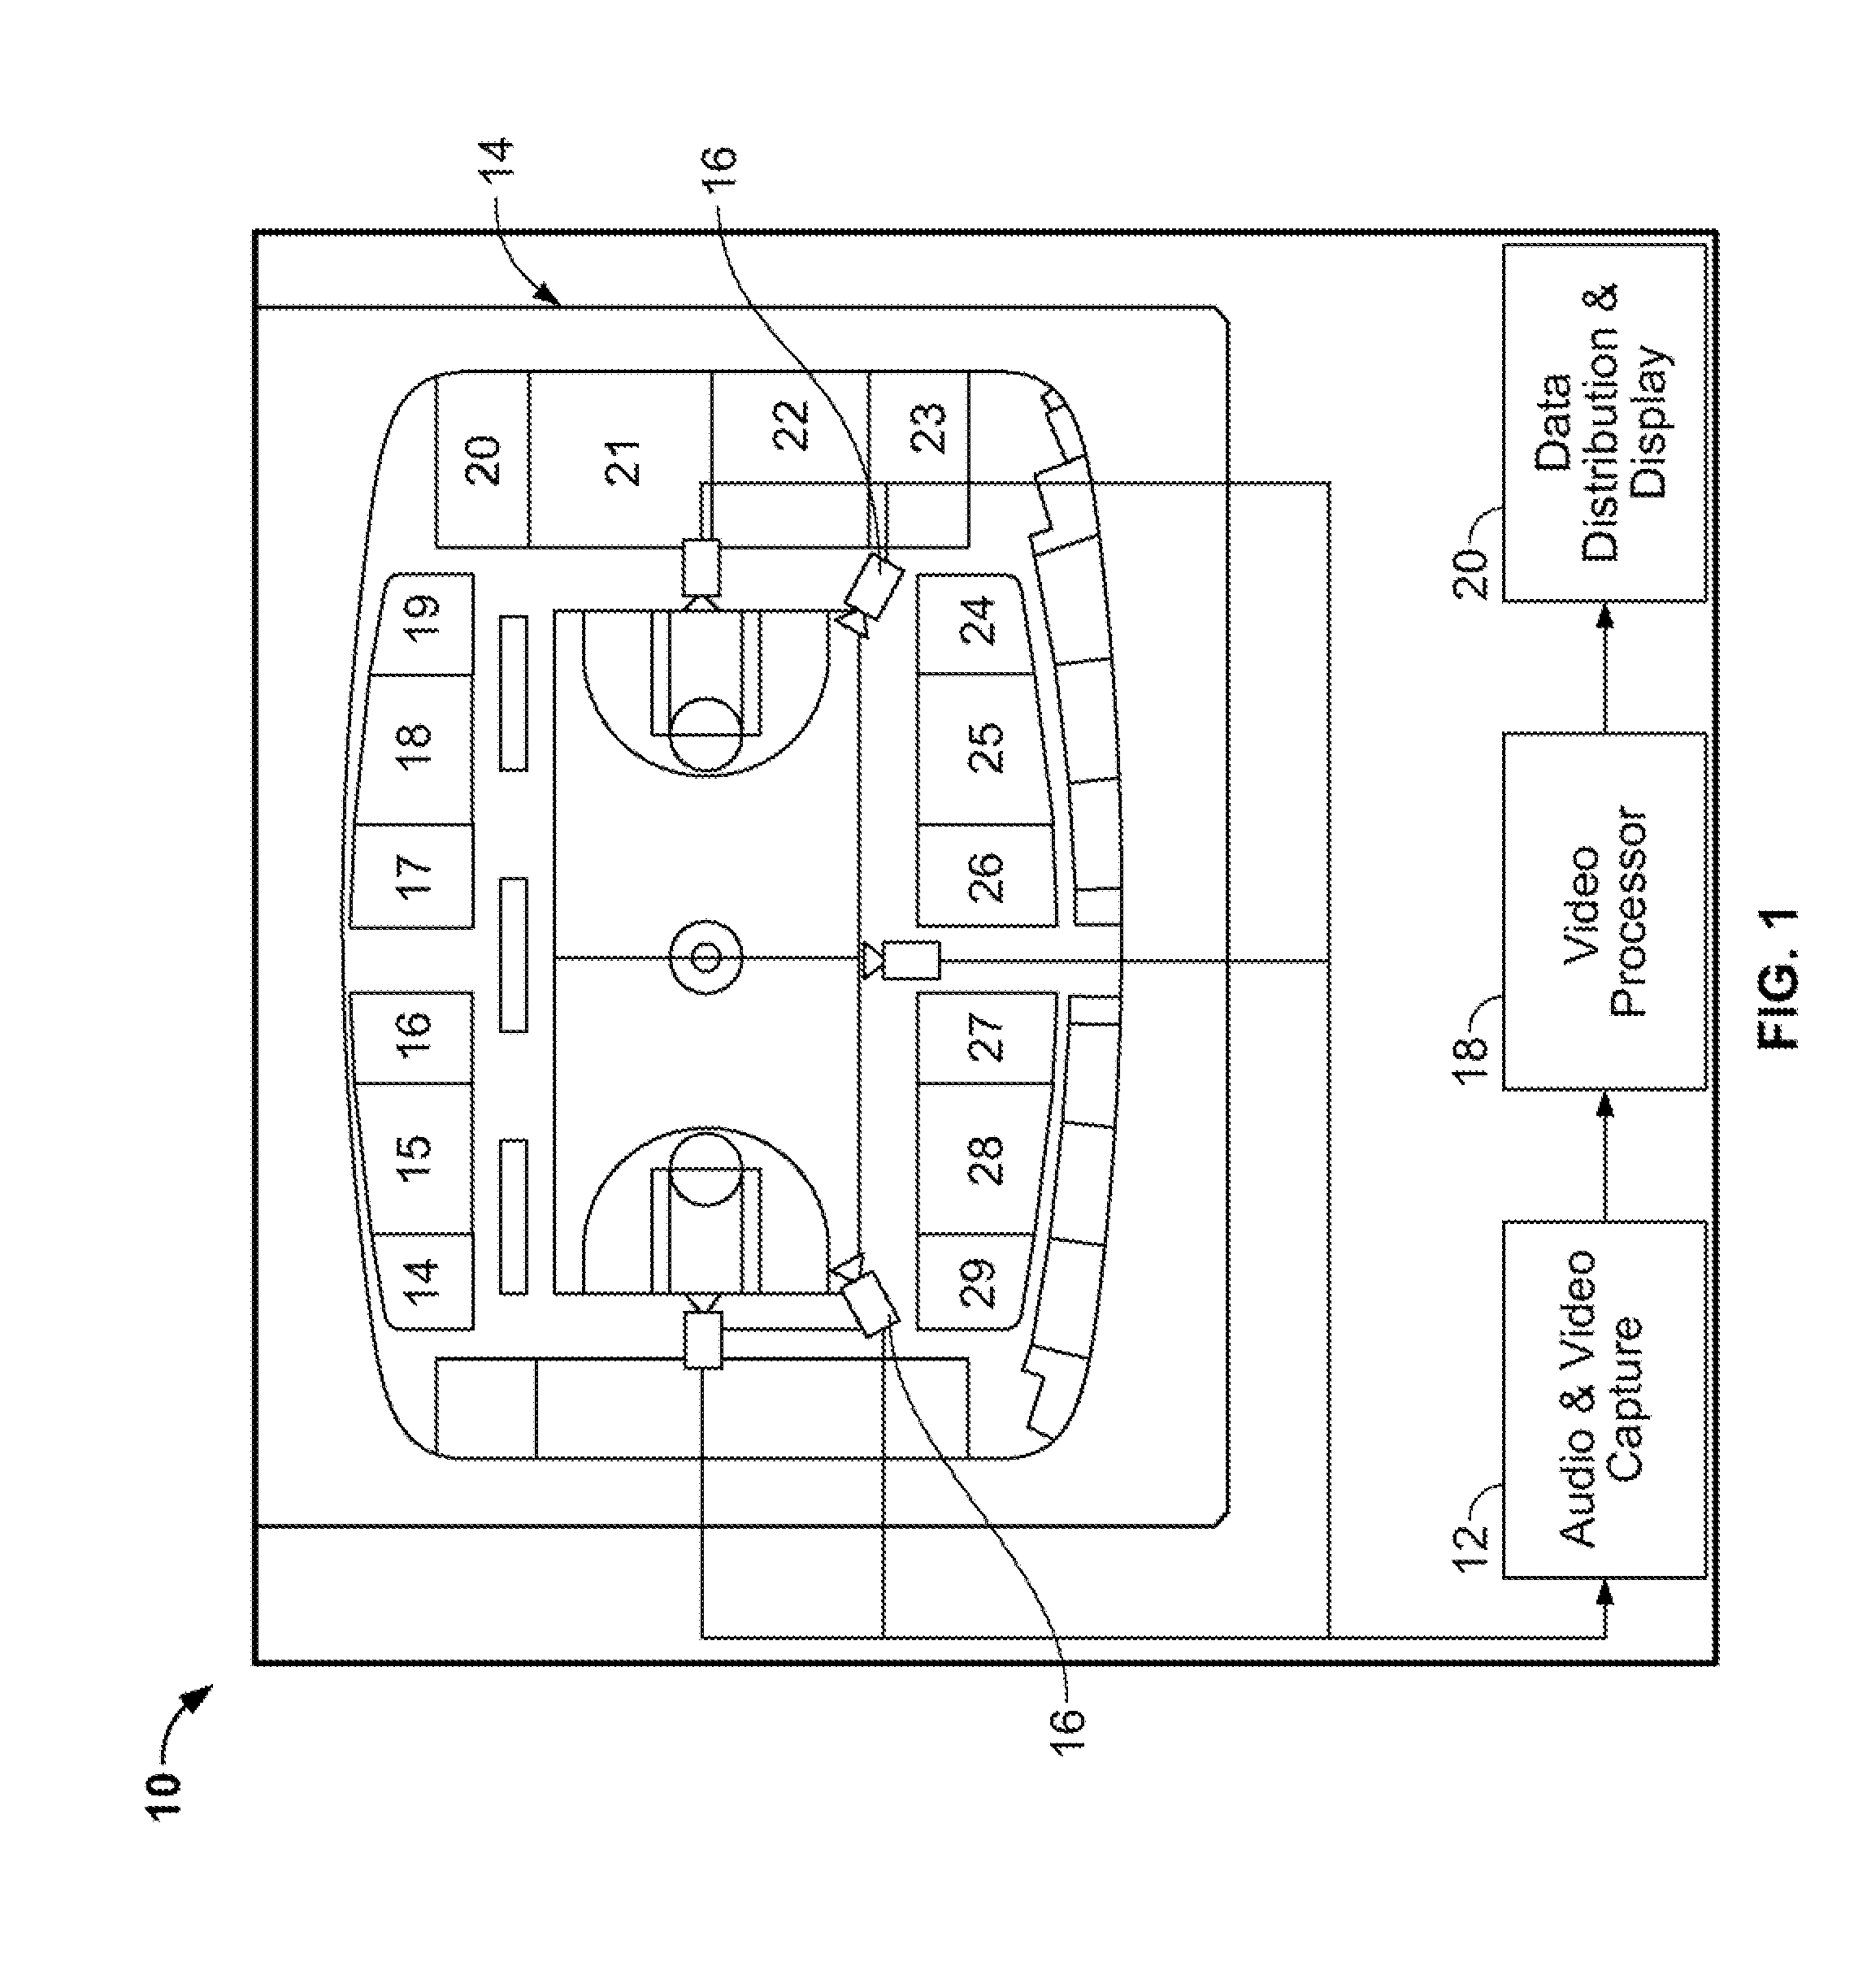 Apparatus for intelligent and autonomous video content generation and streaming